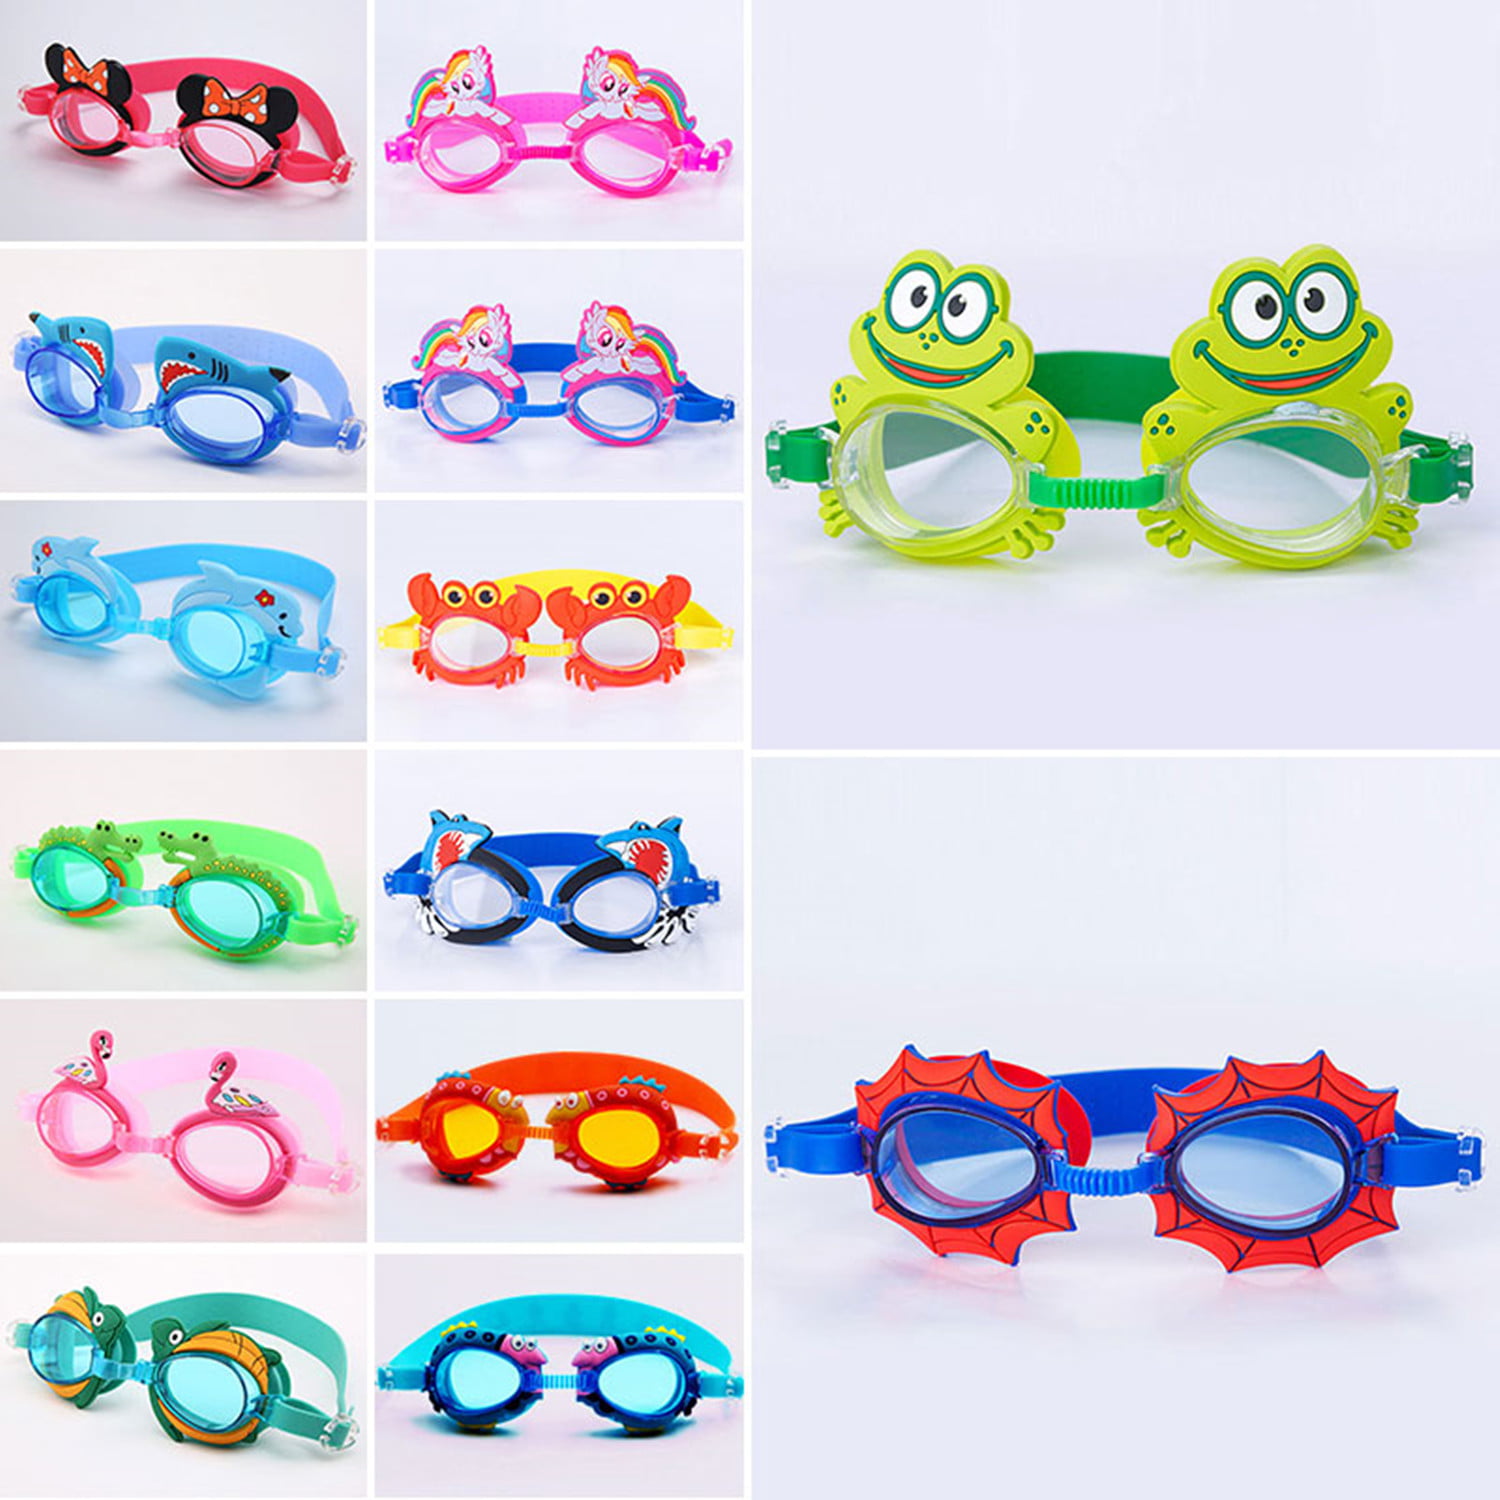 Kids Swim Goggles Age 4-12 Firesara No Leaking Swimming Goggles for Kids Junior Boys Girls Anti Fog UV Protection Crystal Clear Vision Soft Silicone Frame and Strap with Cute Case Ear Plug Nose Clip